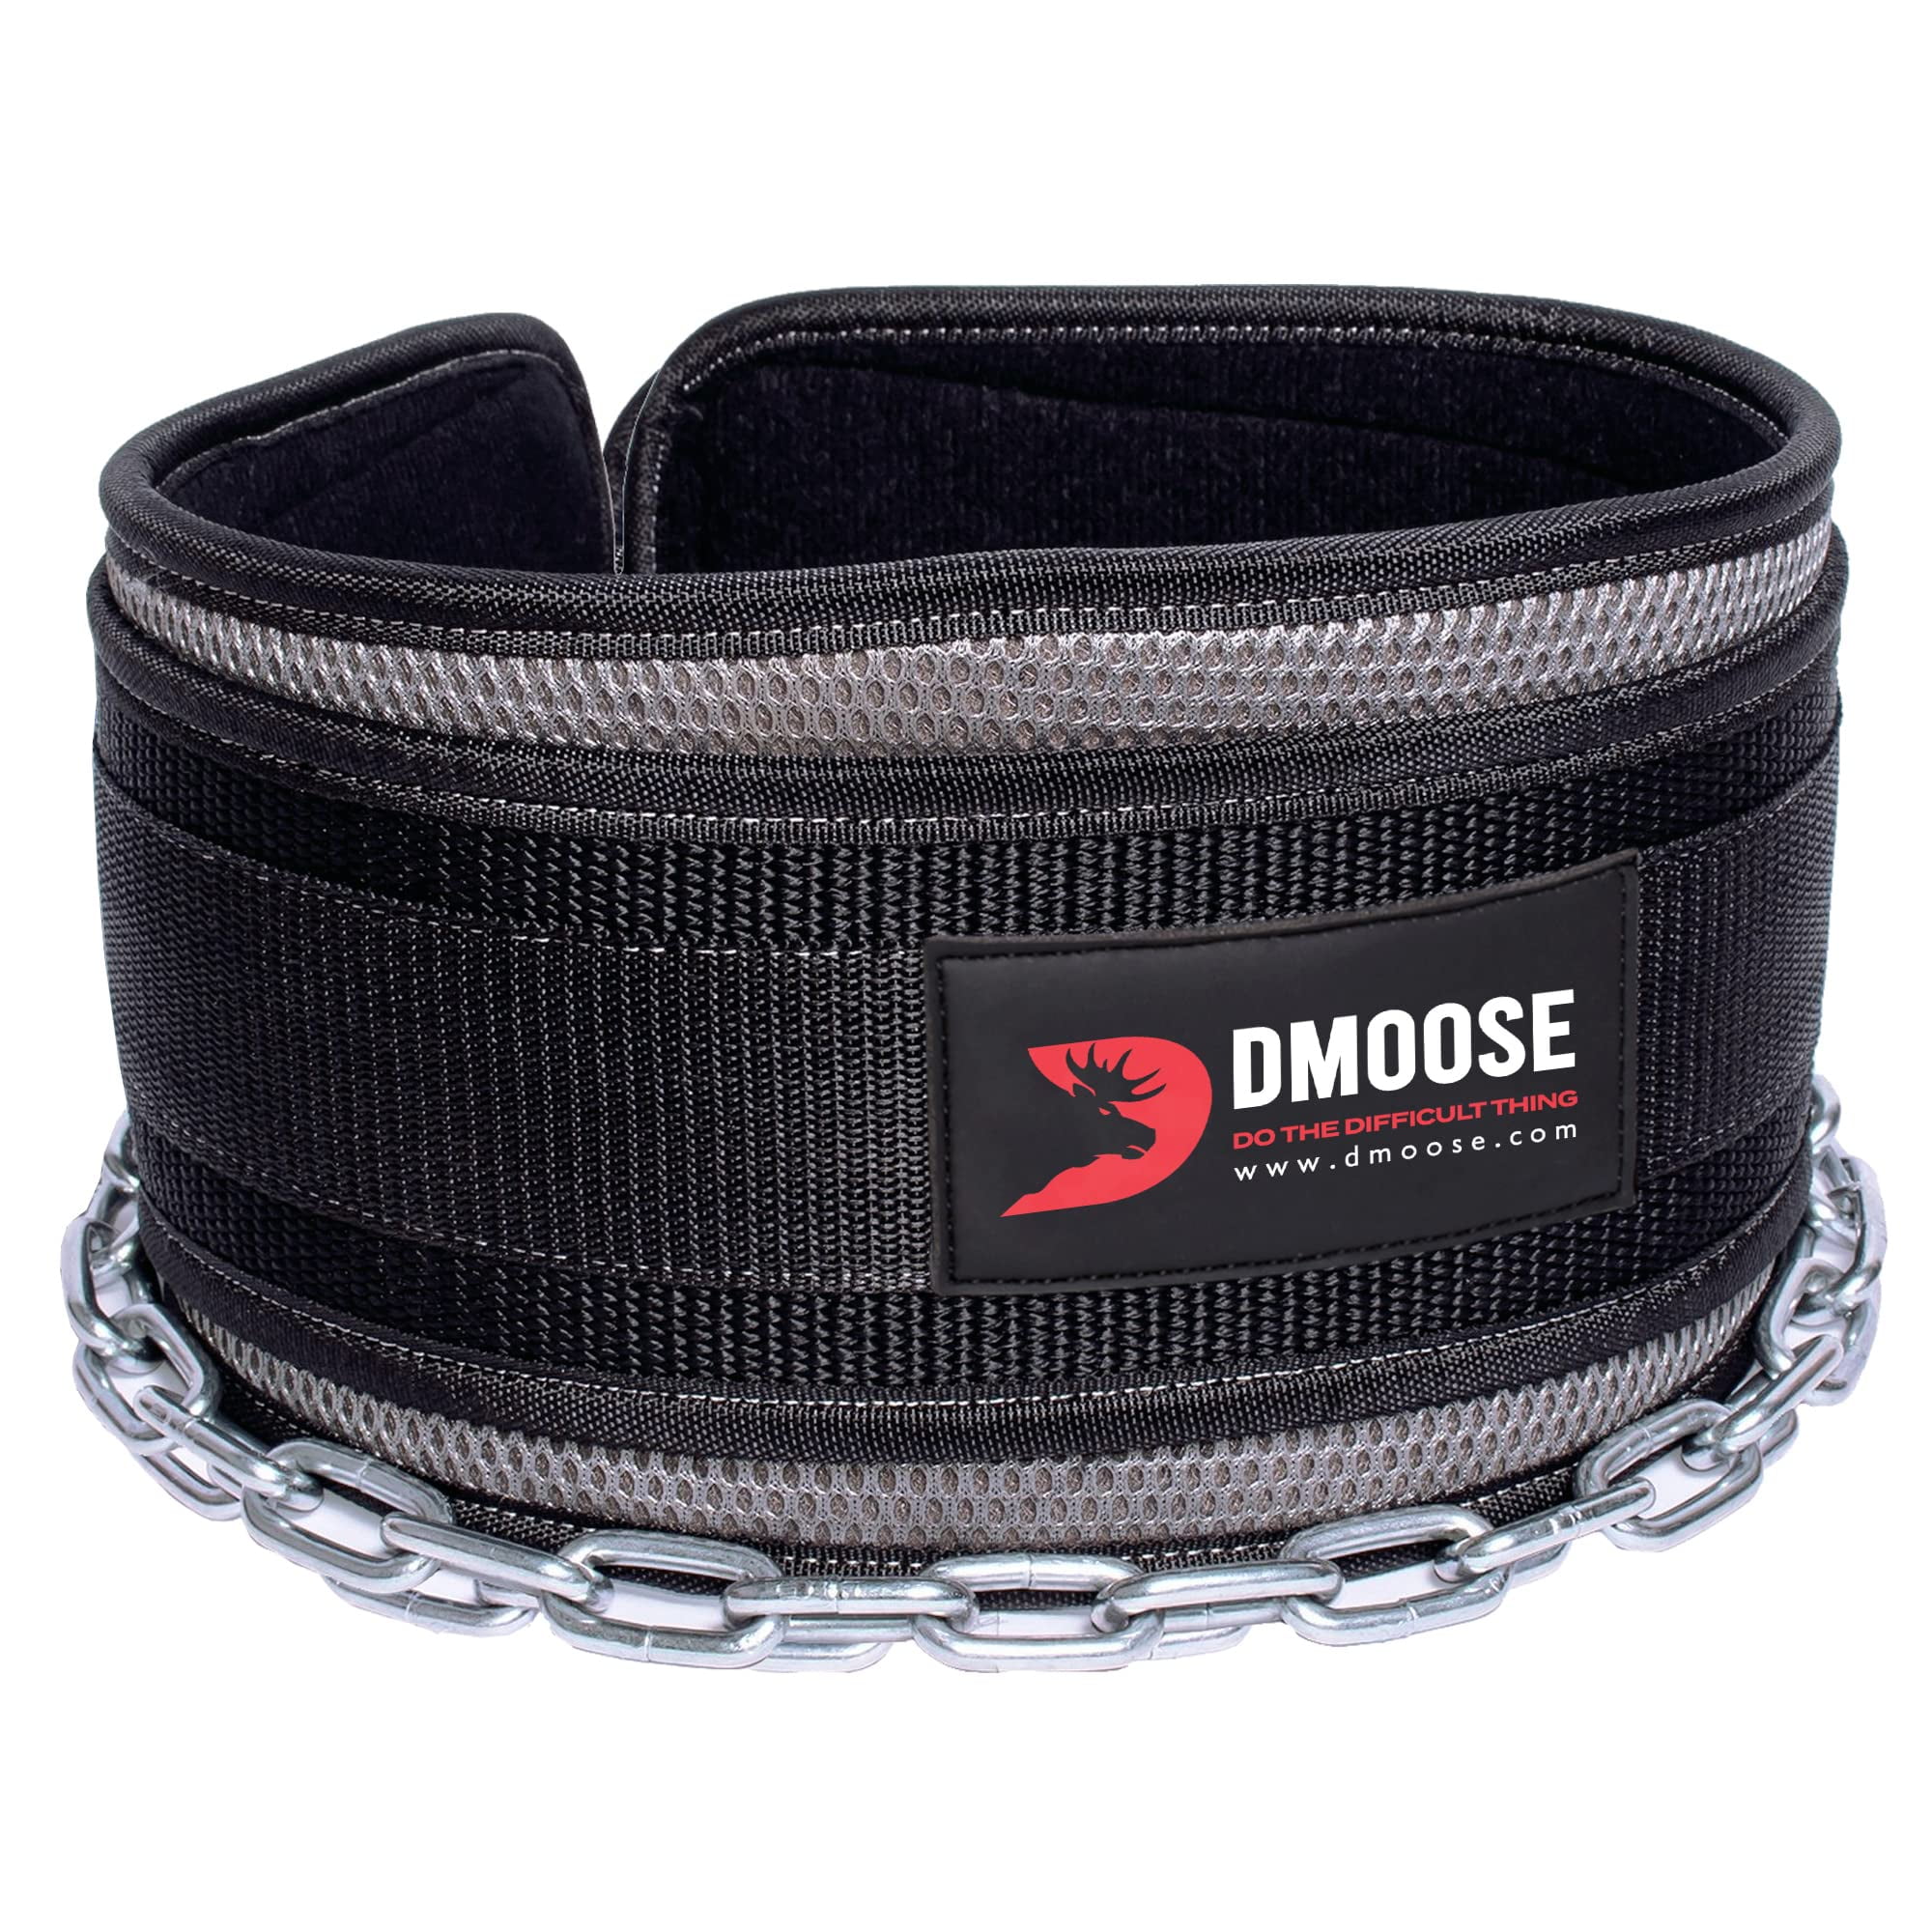 DMoose Fitness Dip Belt with Chain for Weightlifting, Pullups,  Powerlifting, Crossfit, and Bodybuilding Workouts, Long Heavy Duty Steel,  Comfortable